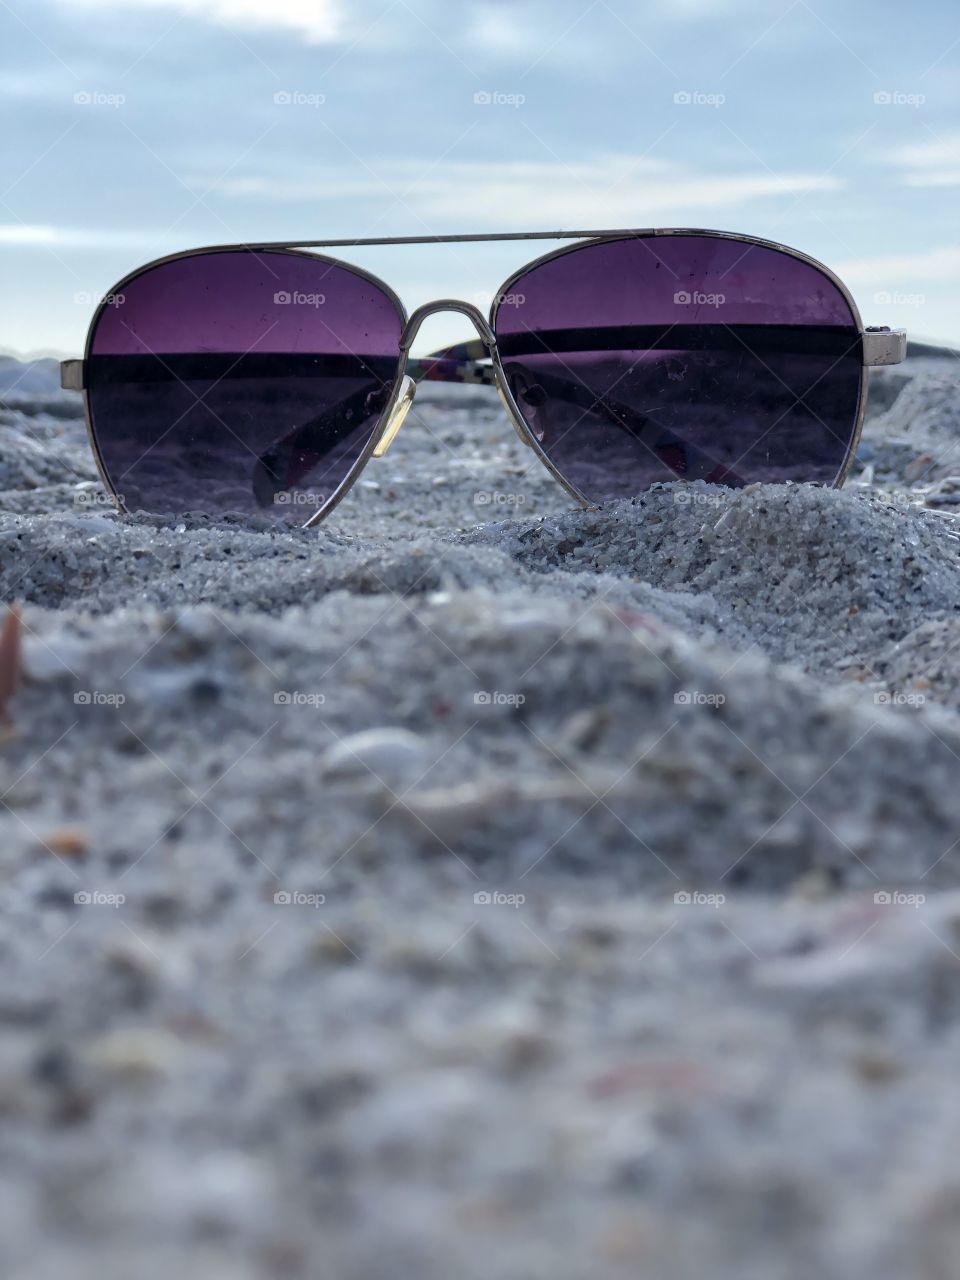 Sunglasses In Sand At The Beach